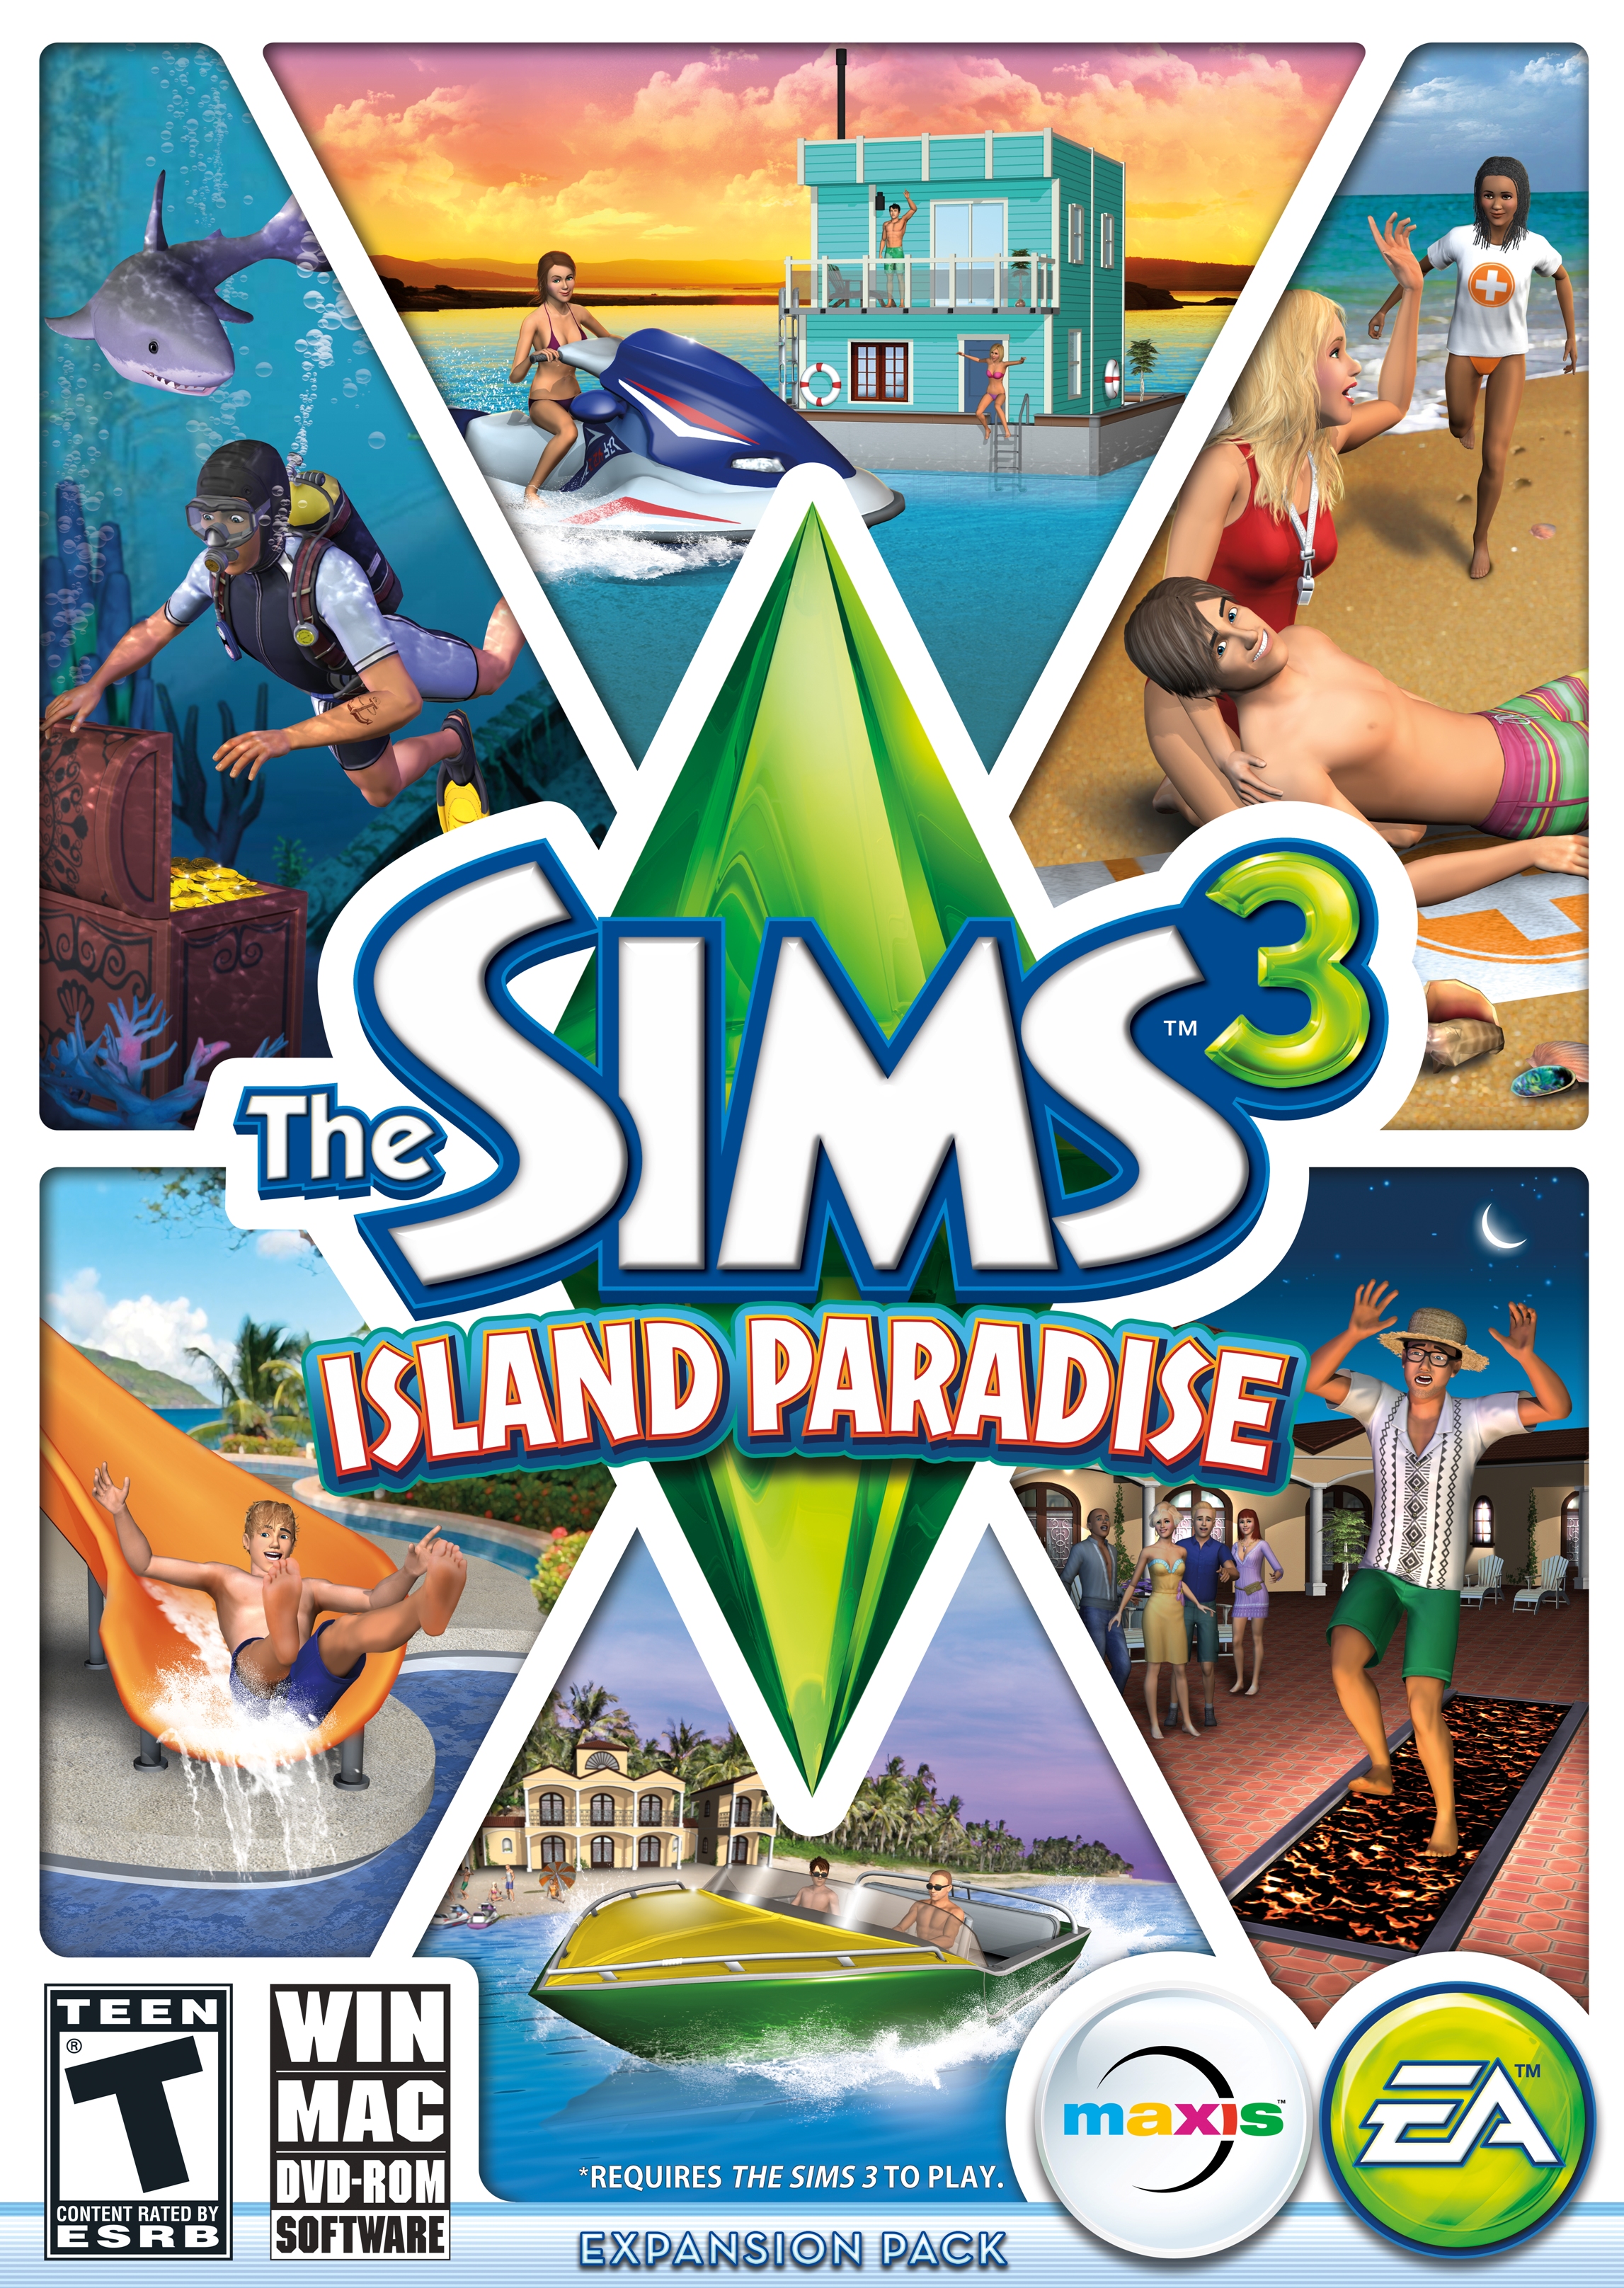 sims 3 island paradise map pieces